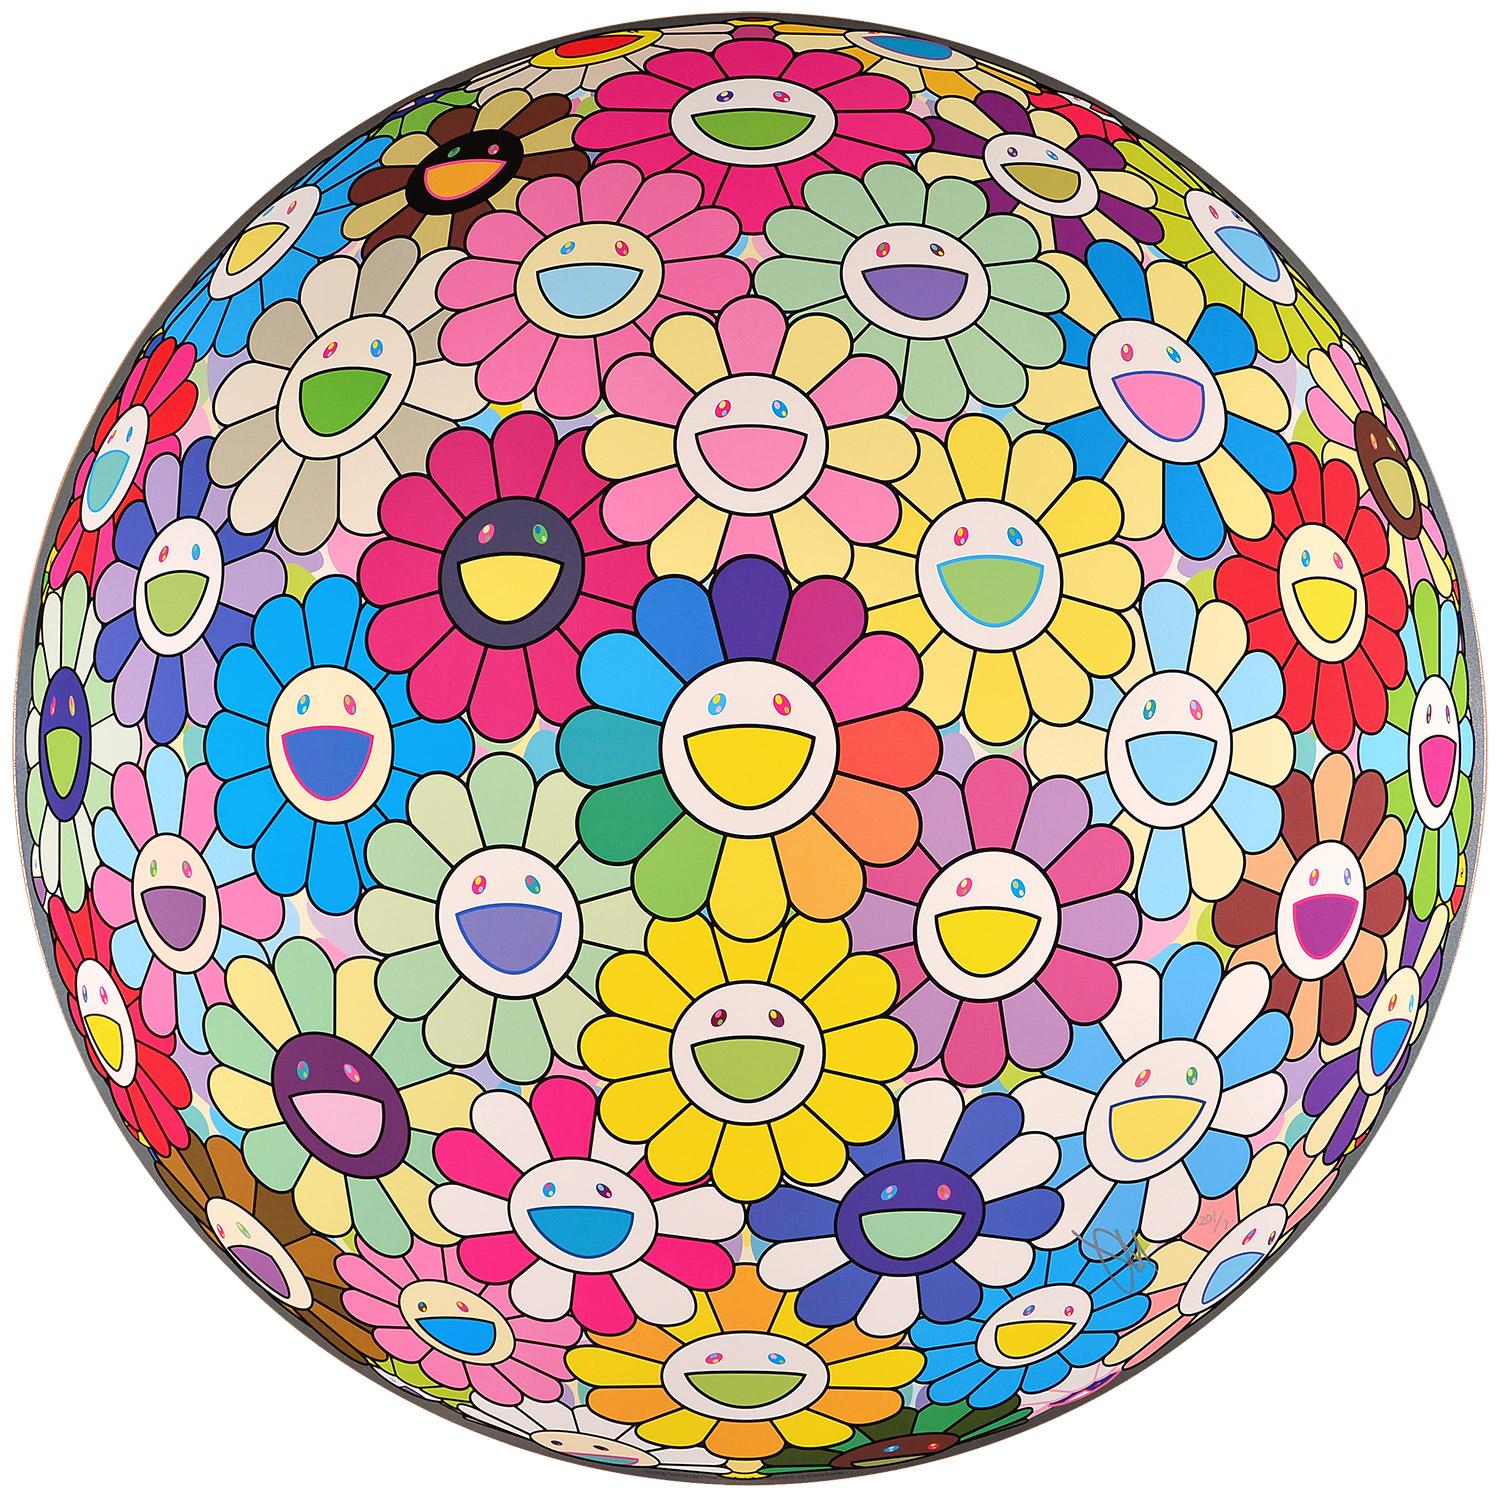 TAKASHI MURAKAMI - BURYING MY FACE IN THE FIELD OF FLOWERS Pop Art Red Smiley